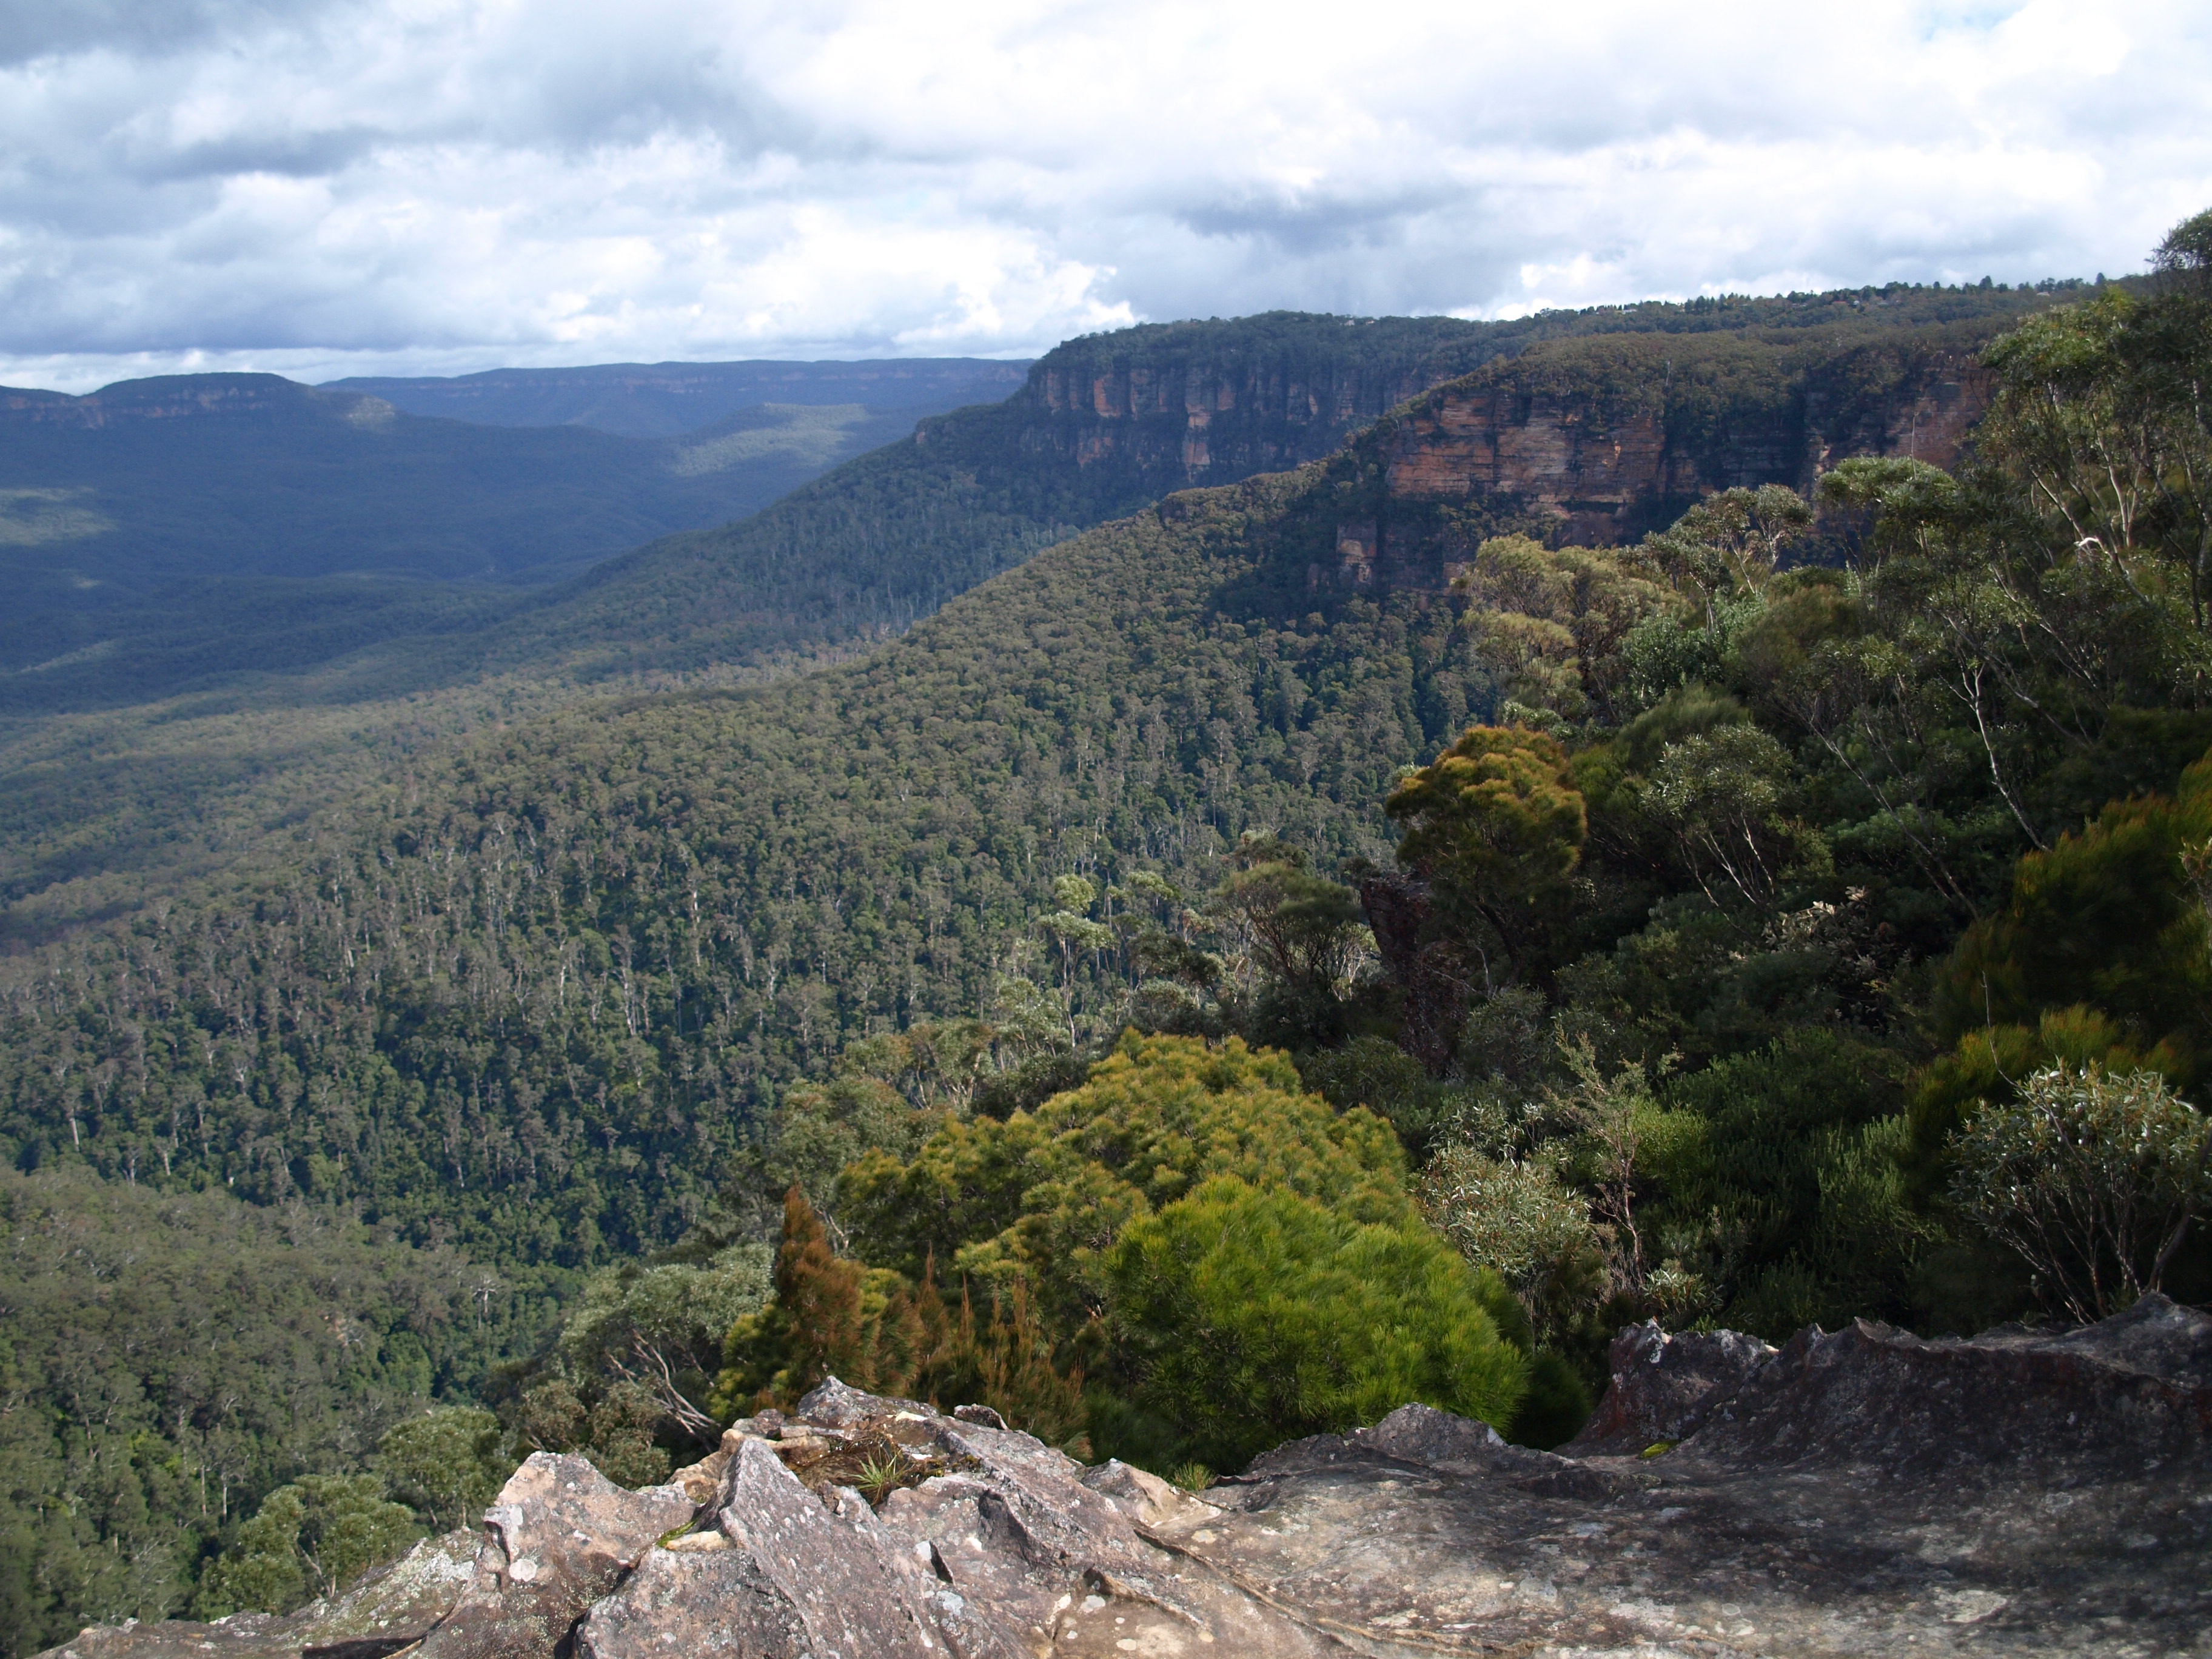 Blue Mountains NSW, as seen from Wentworth Falls area